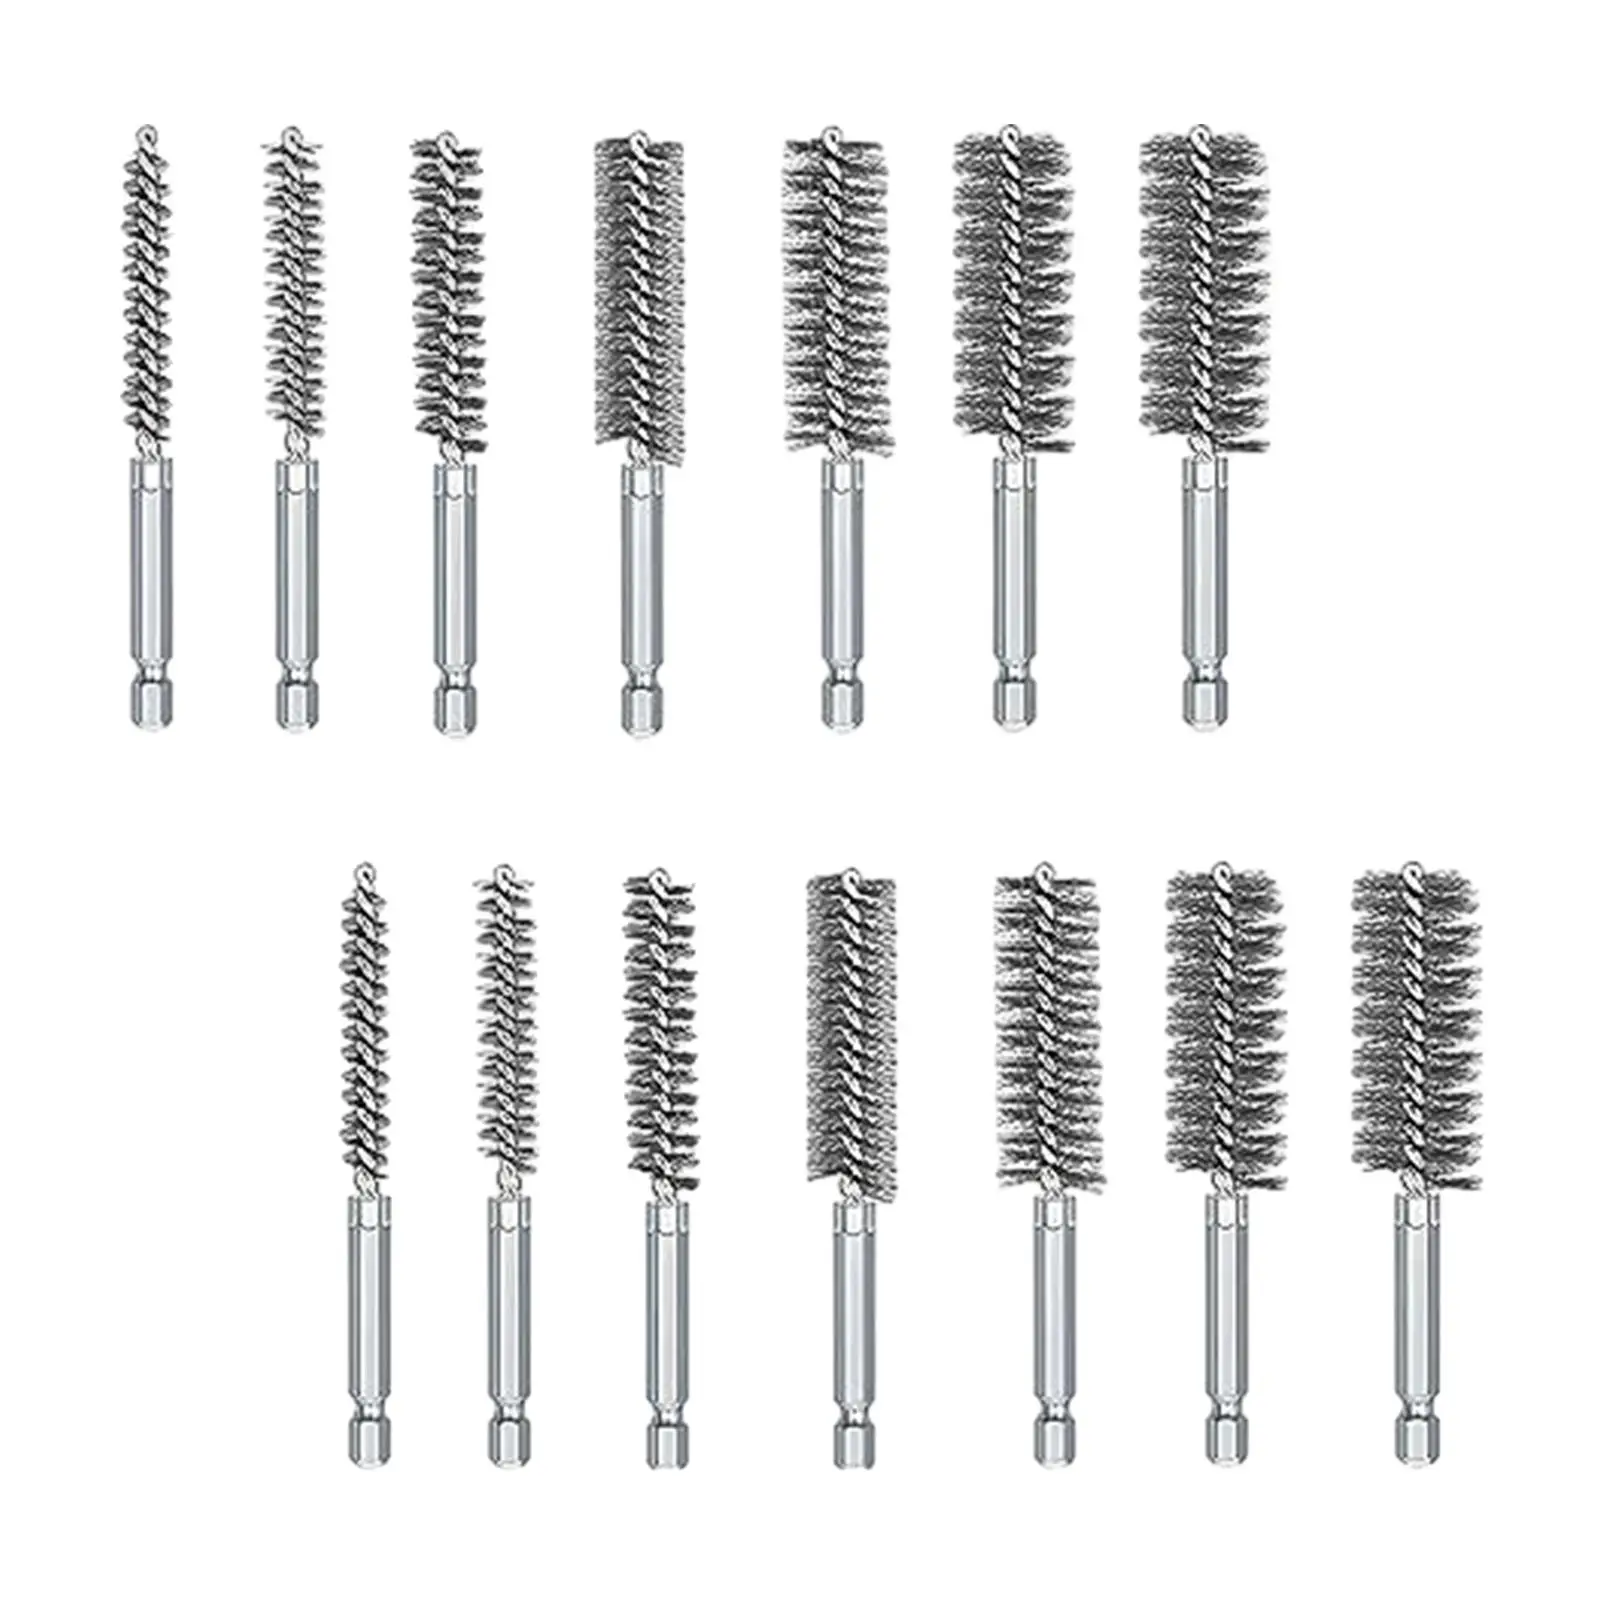 Wire Bore Brush Set Accessories Sturdy Durable 8mm-25mm Different Sizes for Power Drill 1/4 inch Hex Shank Cleaning Wire Brushes